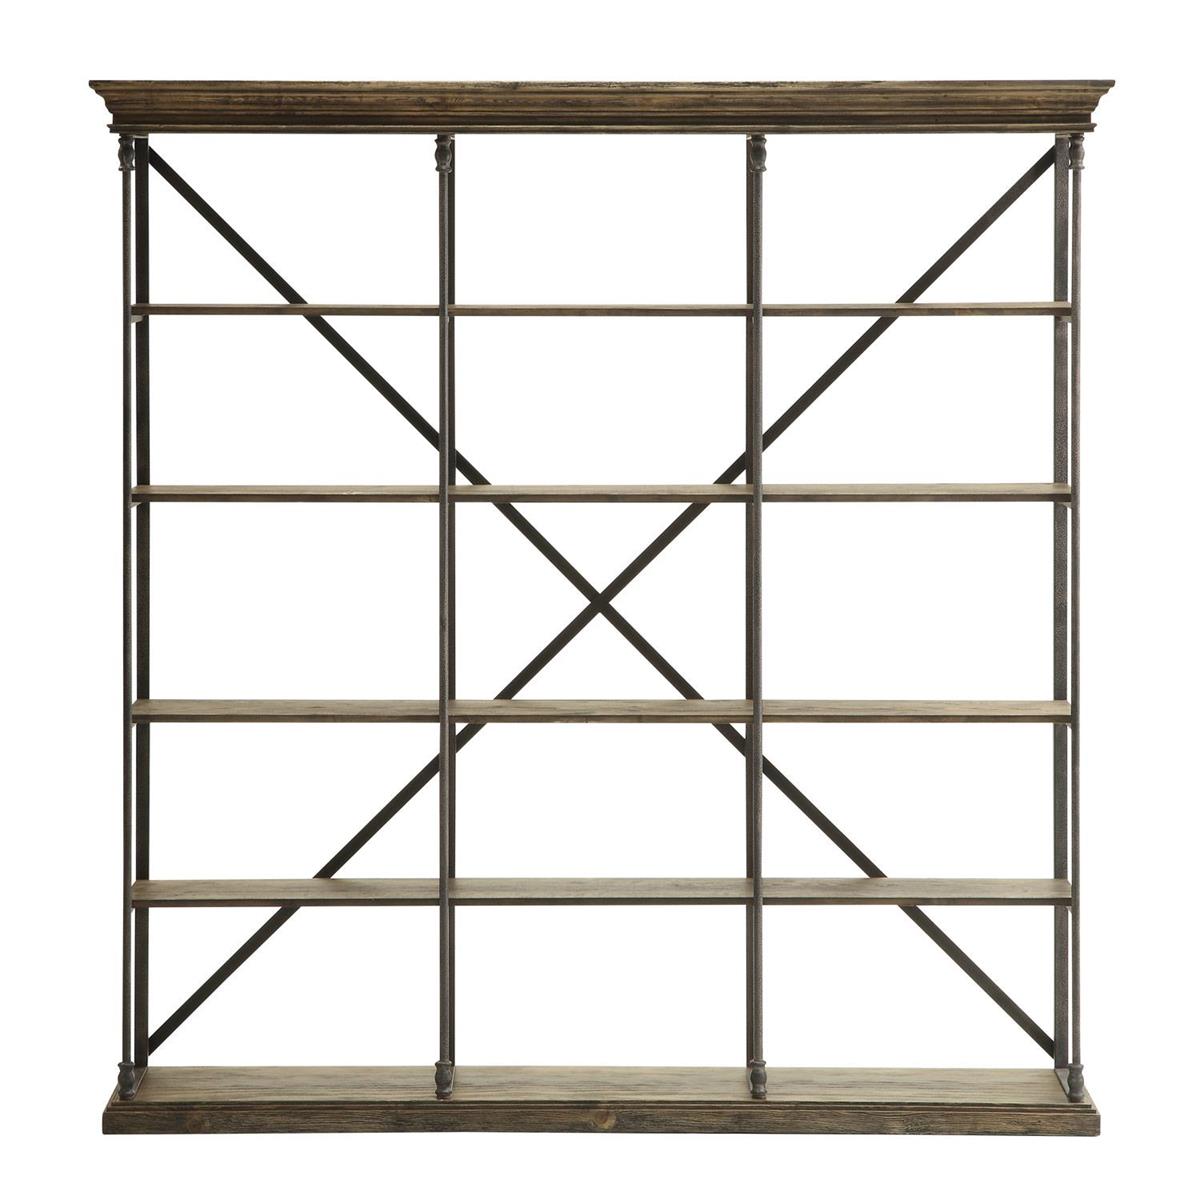 WEEKLY or MONTHLY. Corbin Mega Monster Etagere / Bookcase